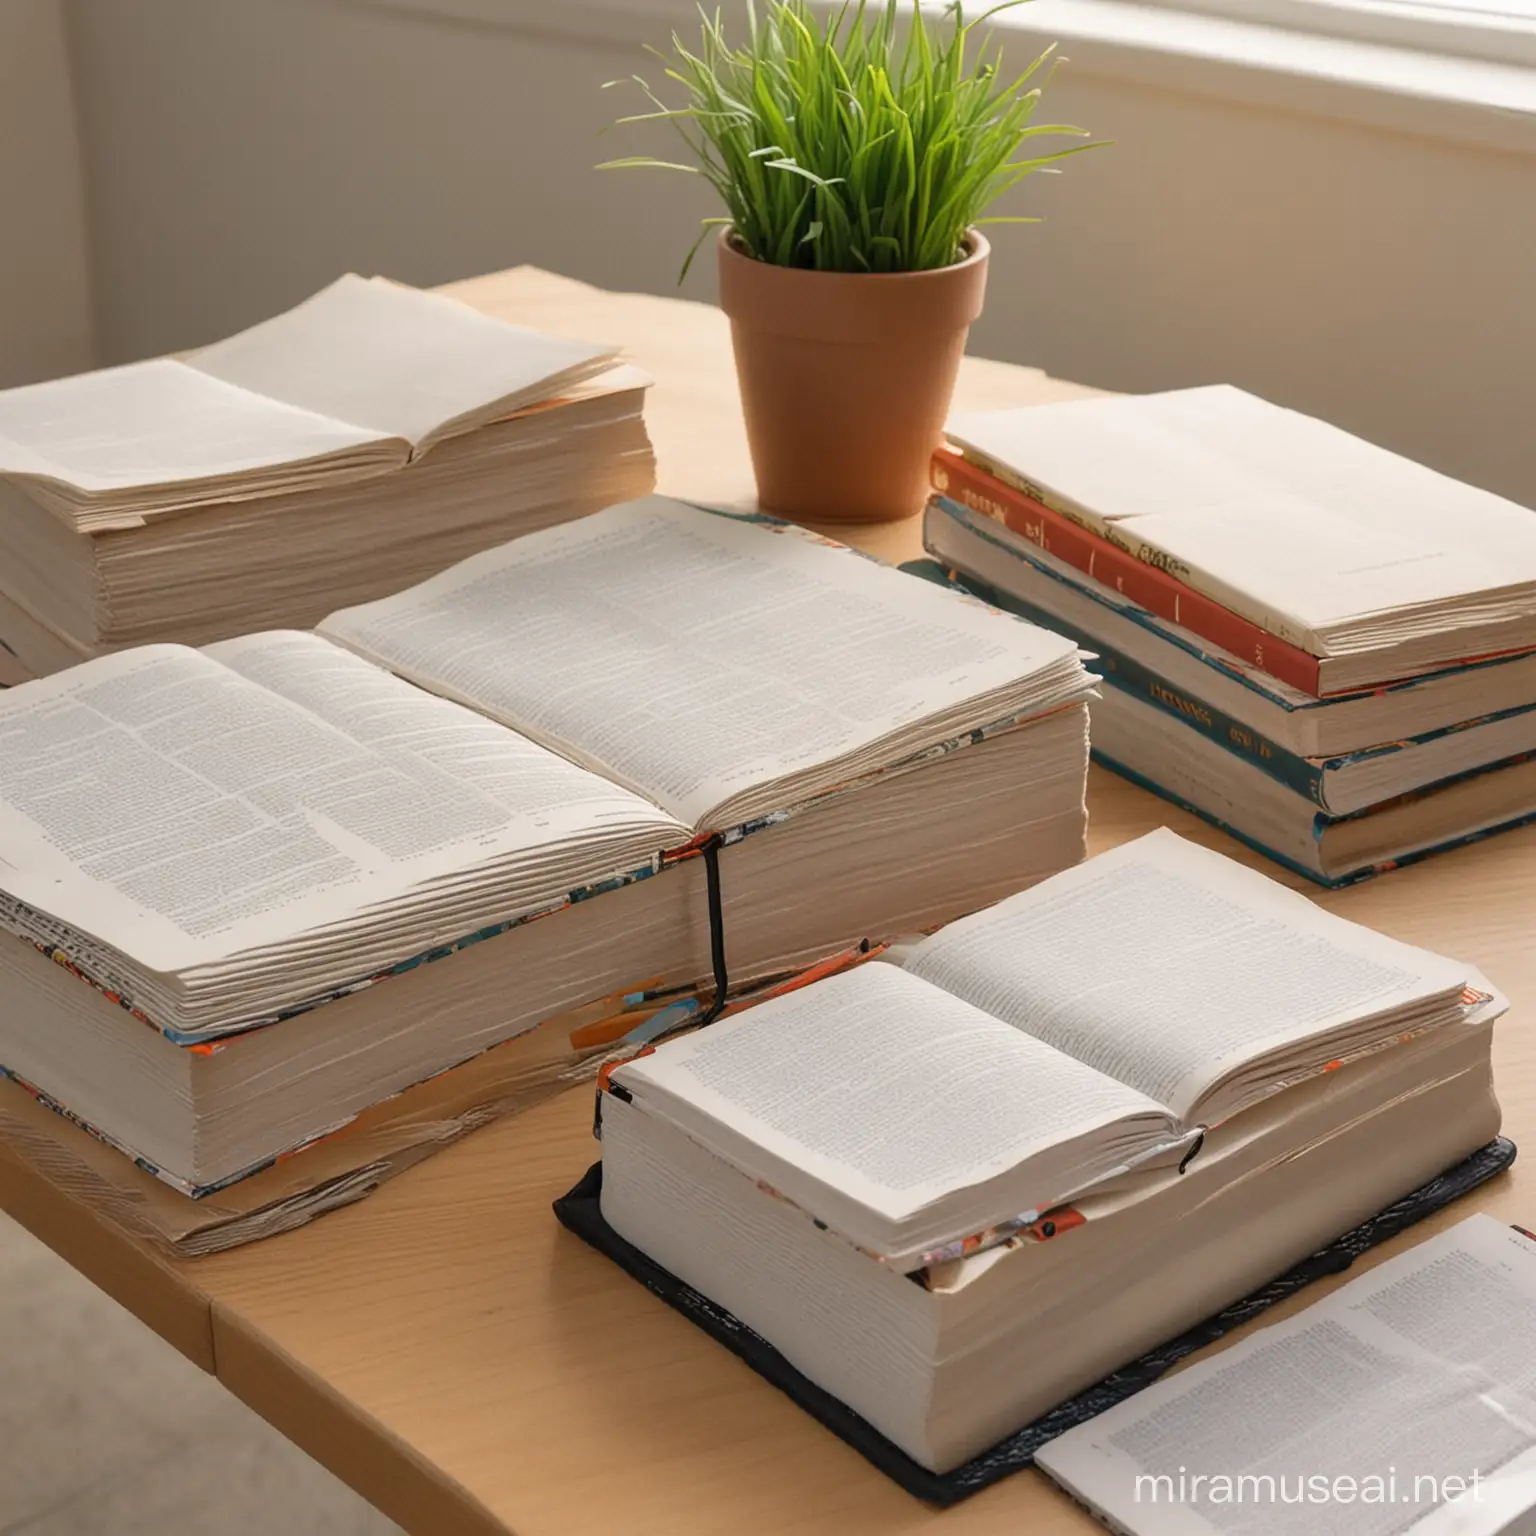 Studying with Scattered Textbooks and Notebooks Modern English Learning Materials